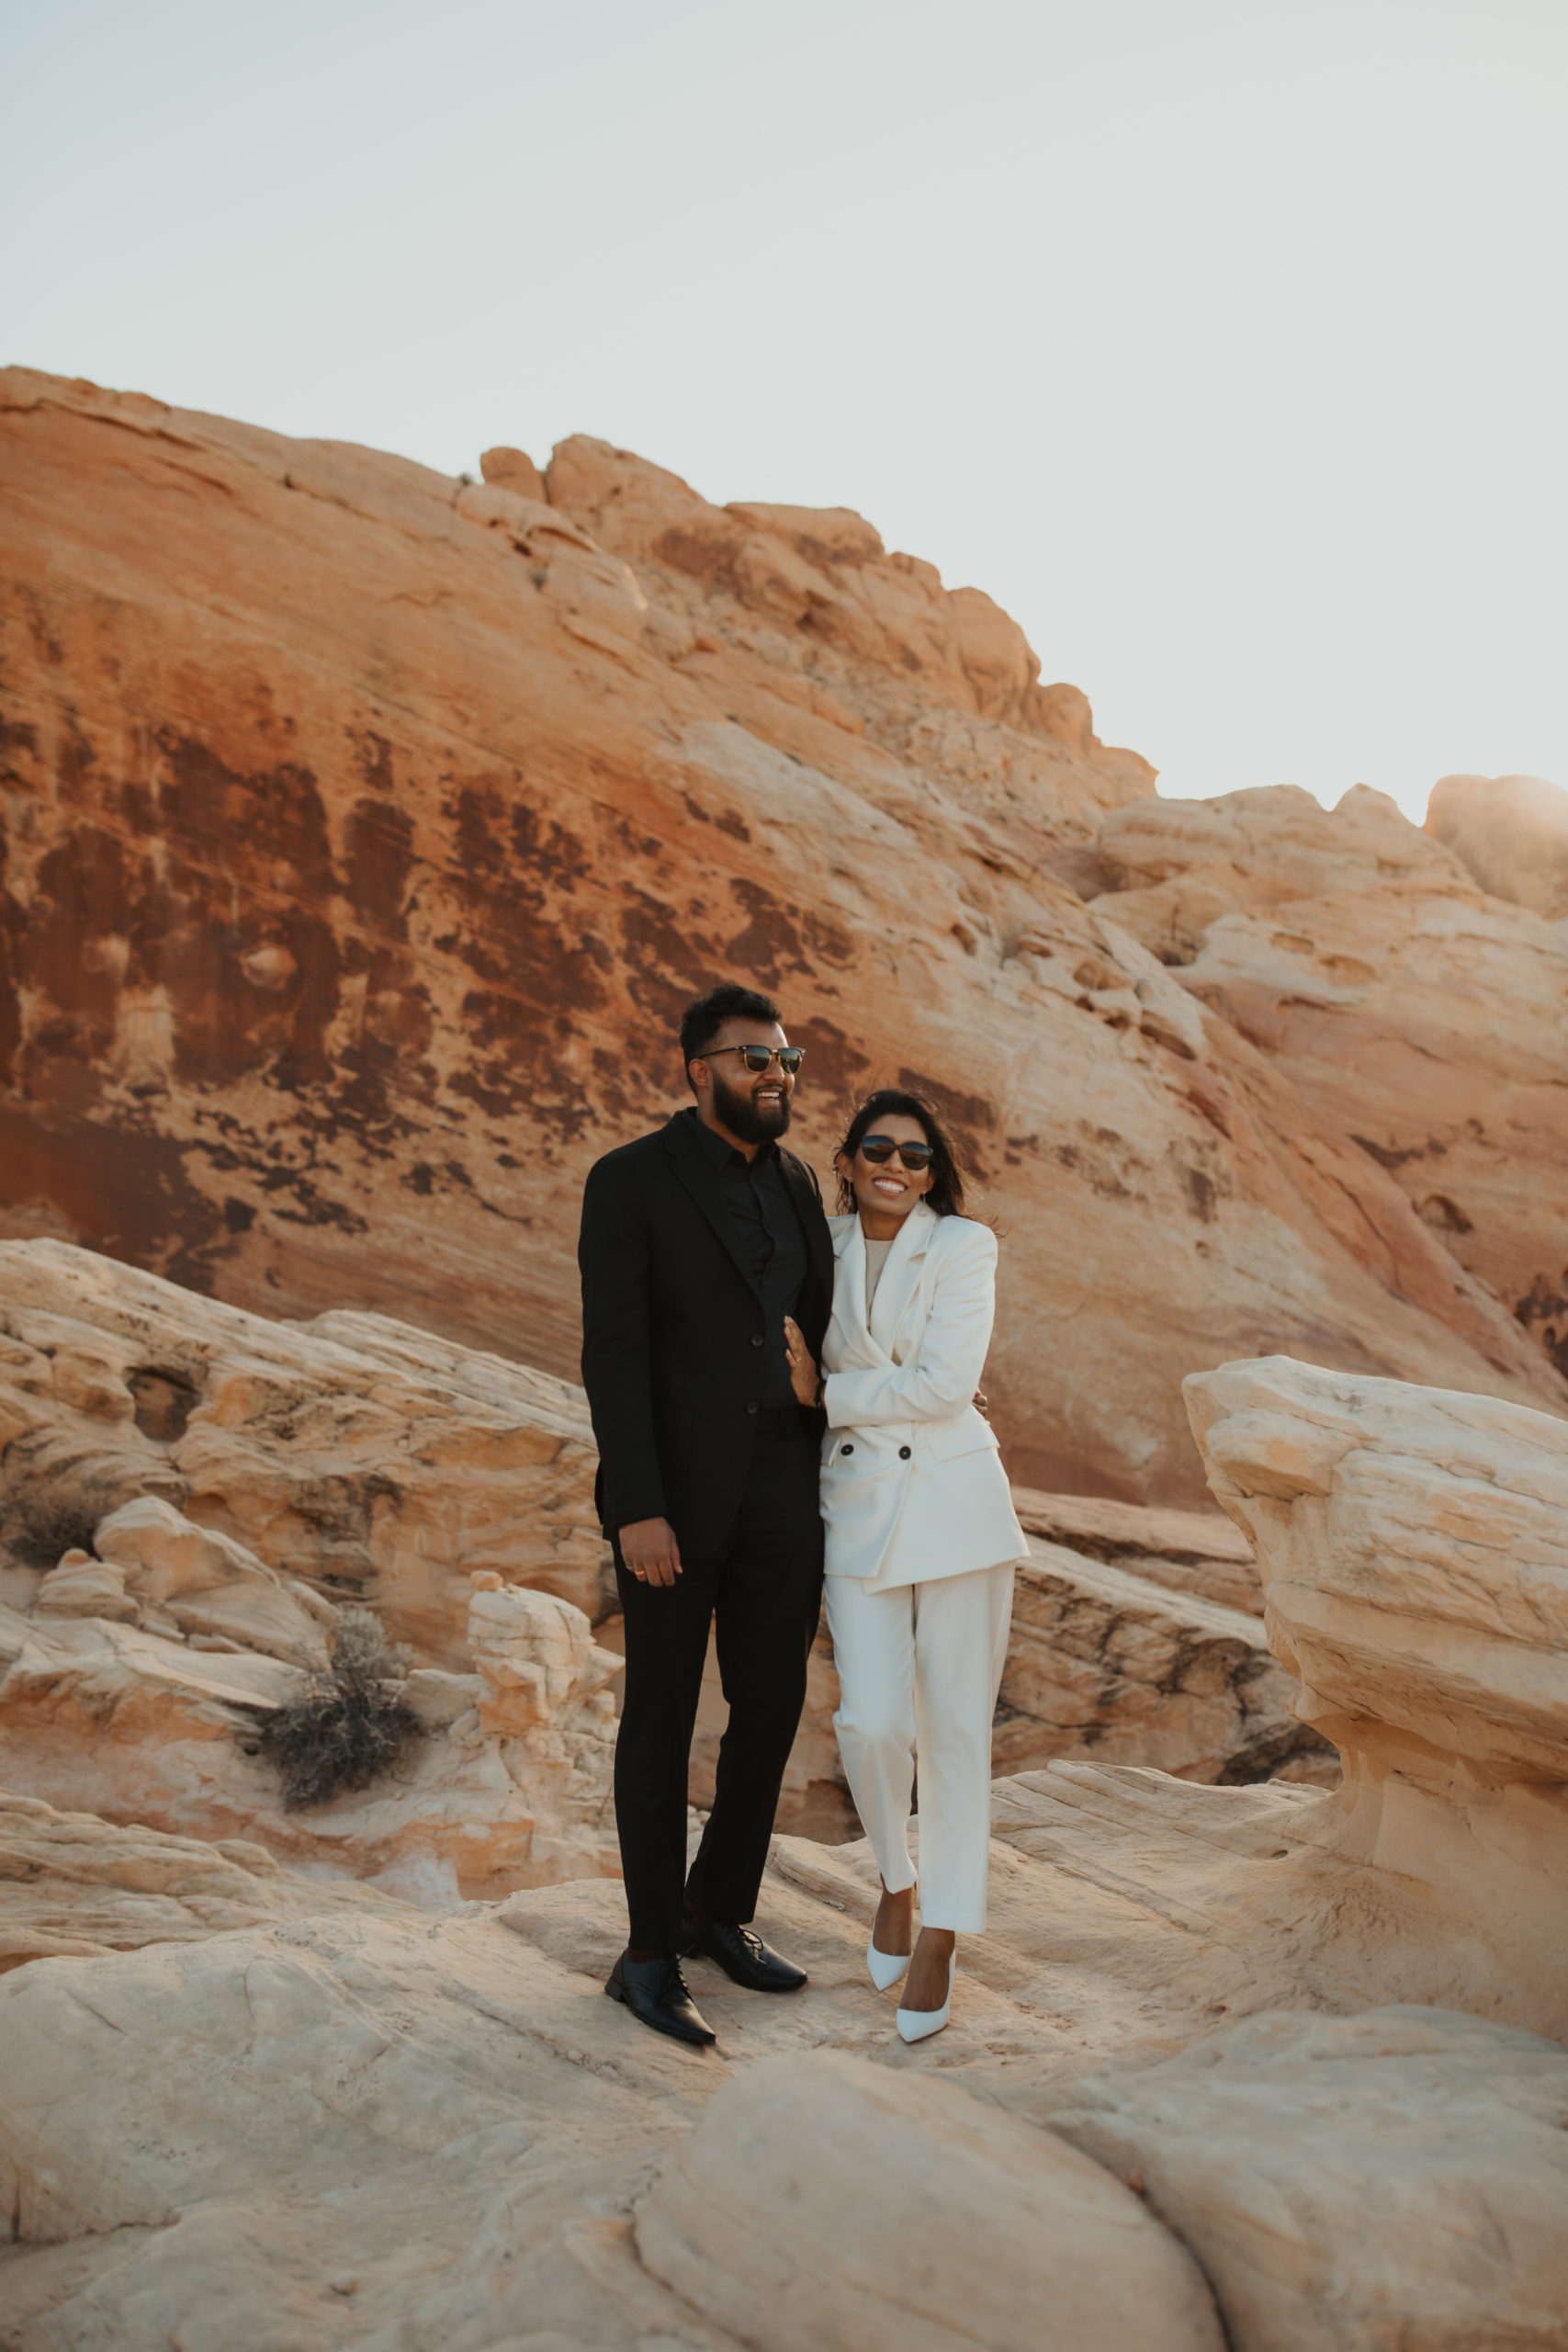 Couple smiling wearing sunglasses in the desert of valley of fire